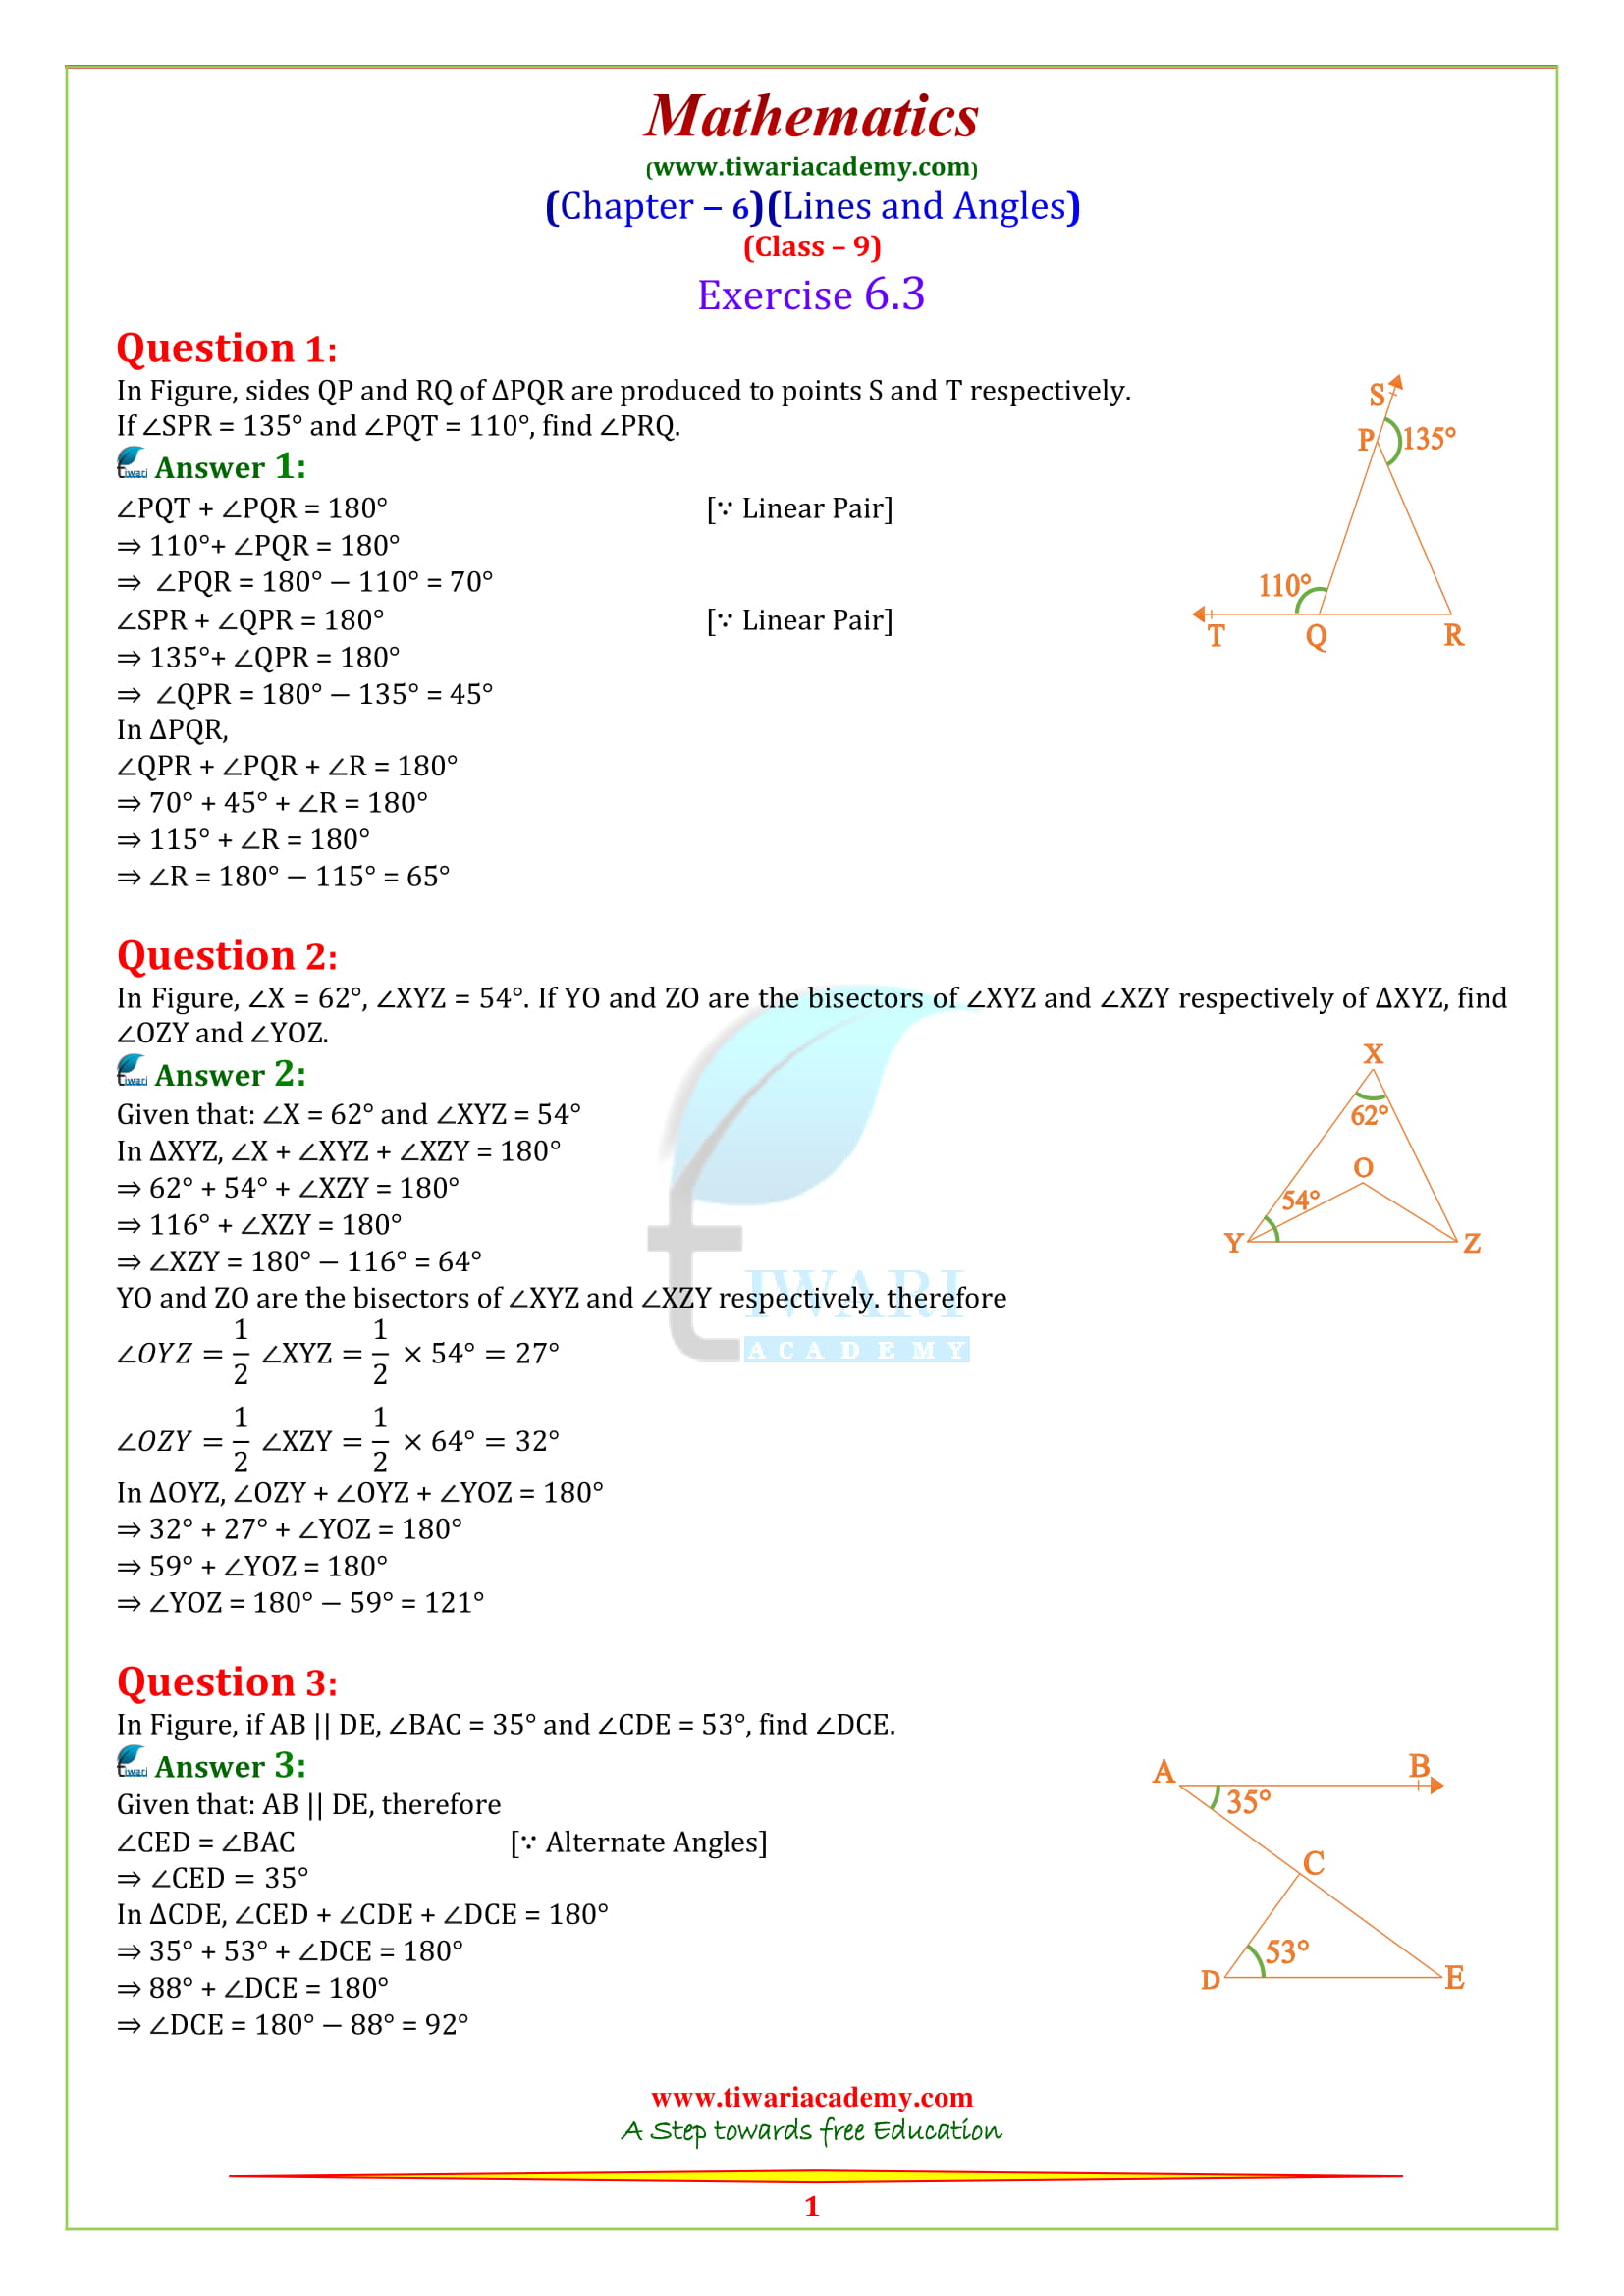 NCERT Solutions for class 9 Maths Chapter 6 Exercise 6.3 in English